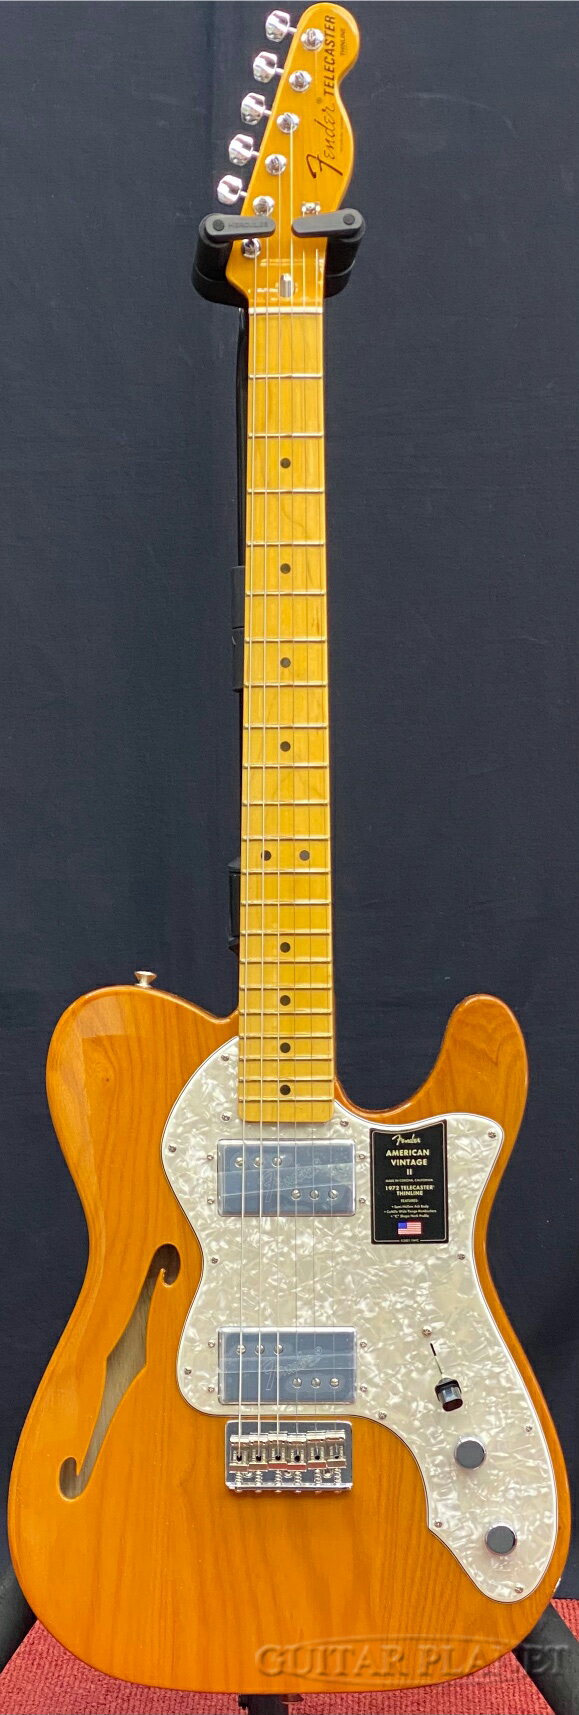 Fender American Vintage II 1972 Telecaster Thinline -Aged Natural/Maple-【V14240】【3.56kg】[フェンダー][アメリカンヴィンテージ][Telecaster,テレキャスター][ナチュラル][Electric Guitar,エレキギター]